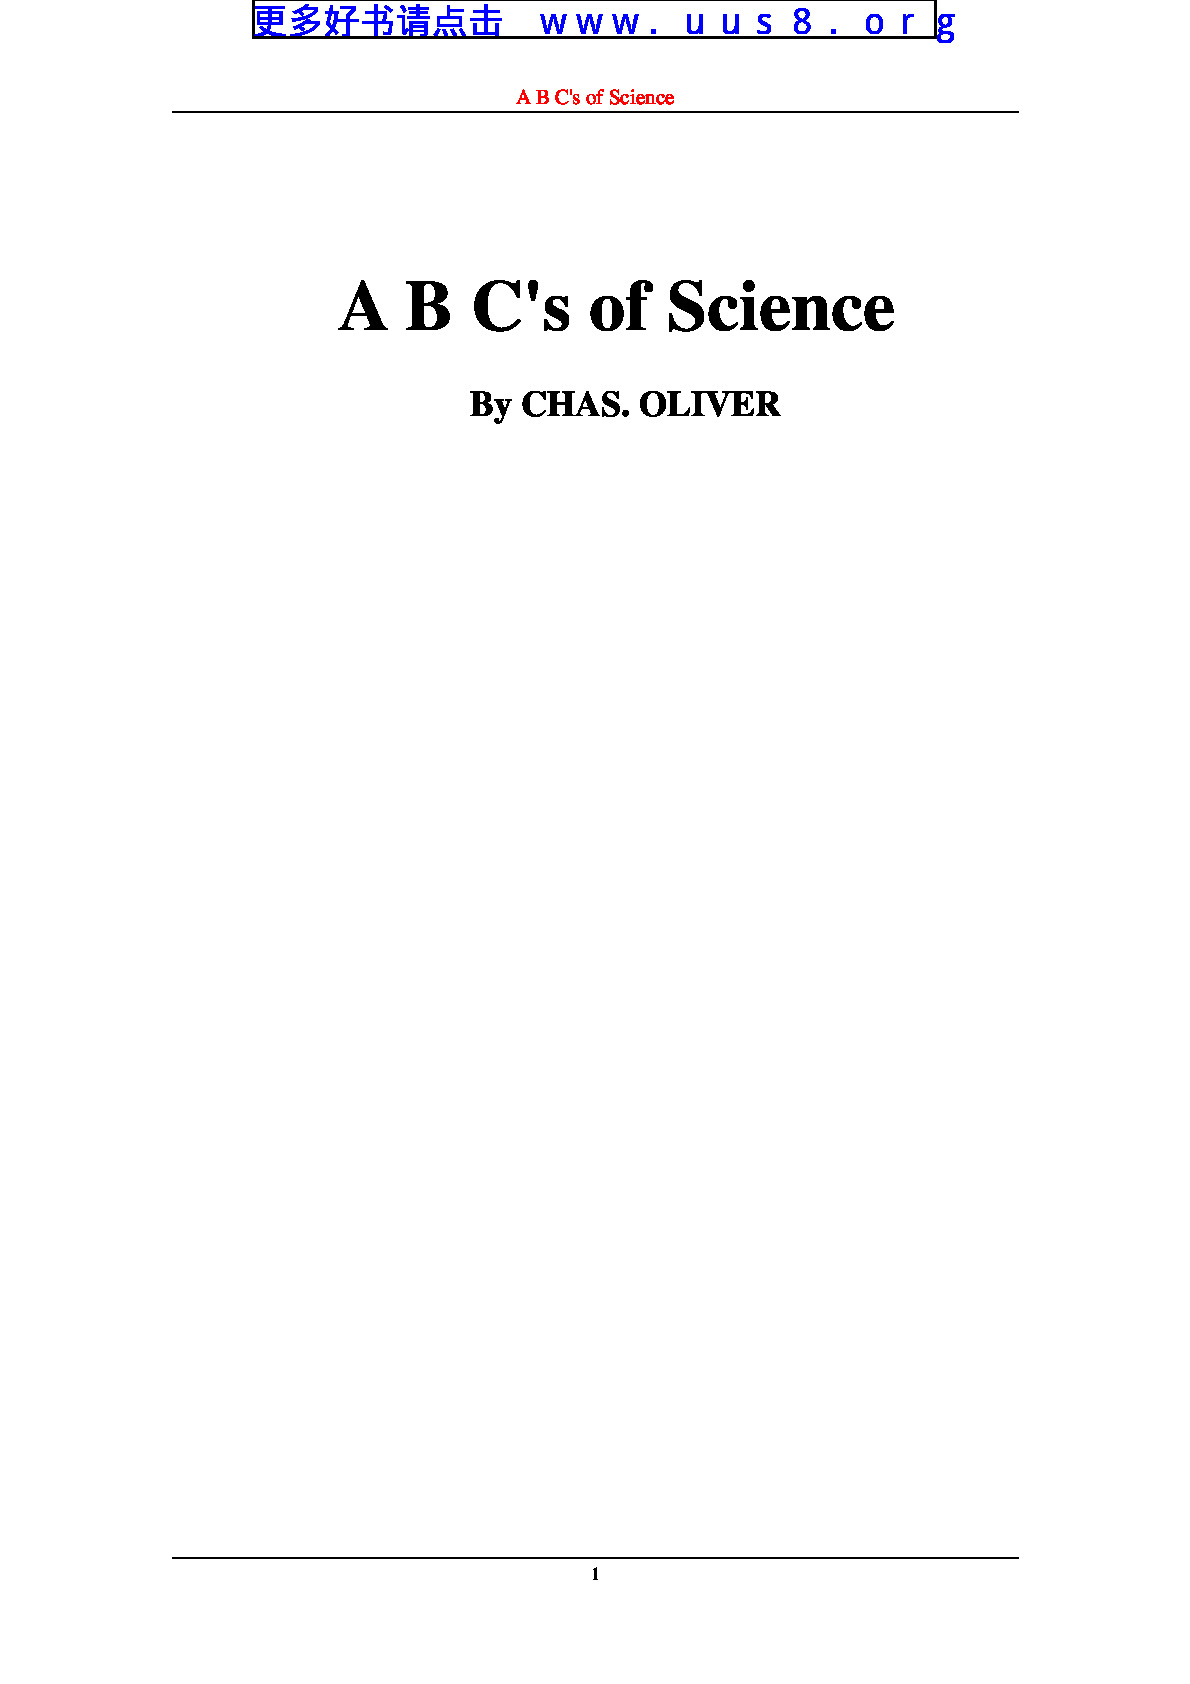 a_b_c’s_of_science(简易科学)